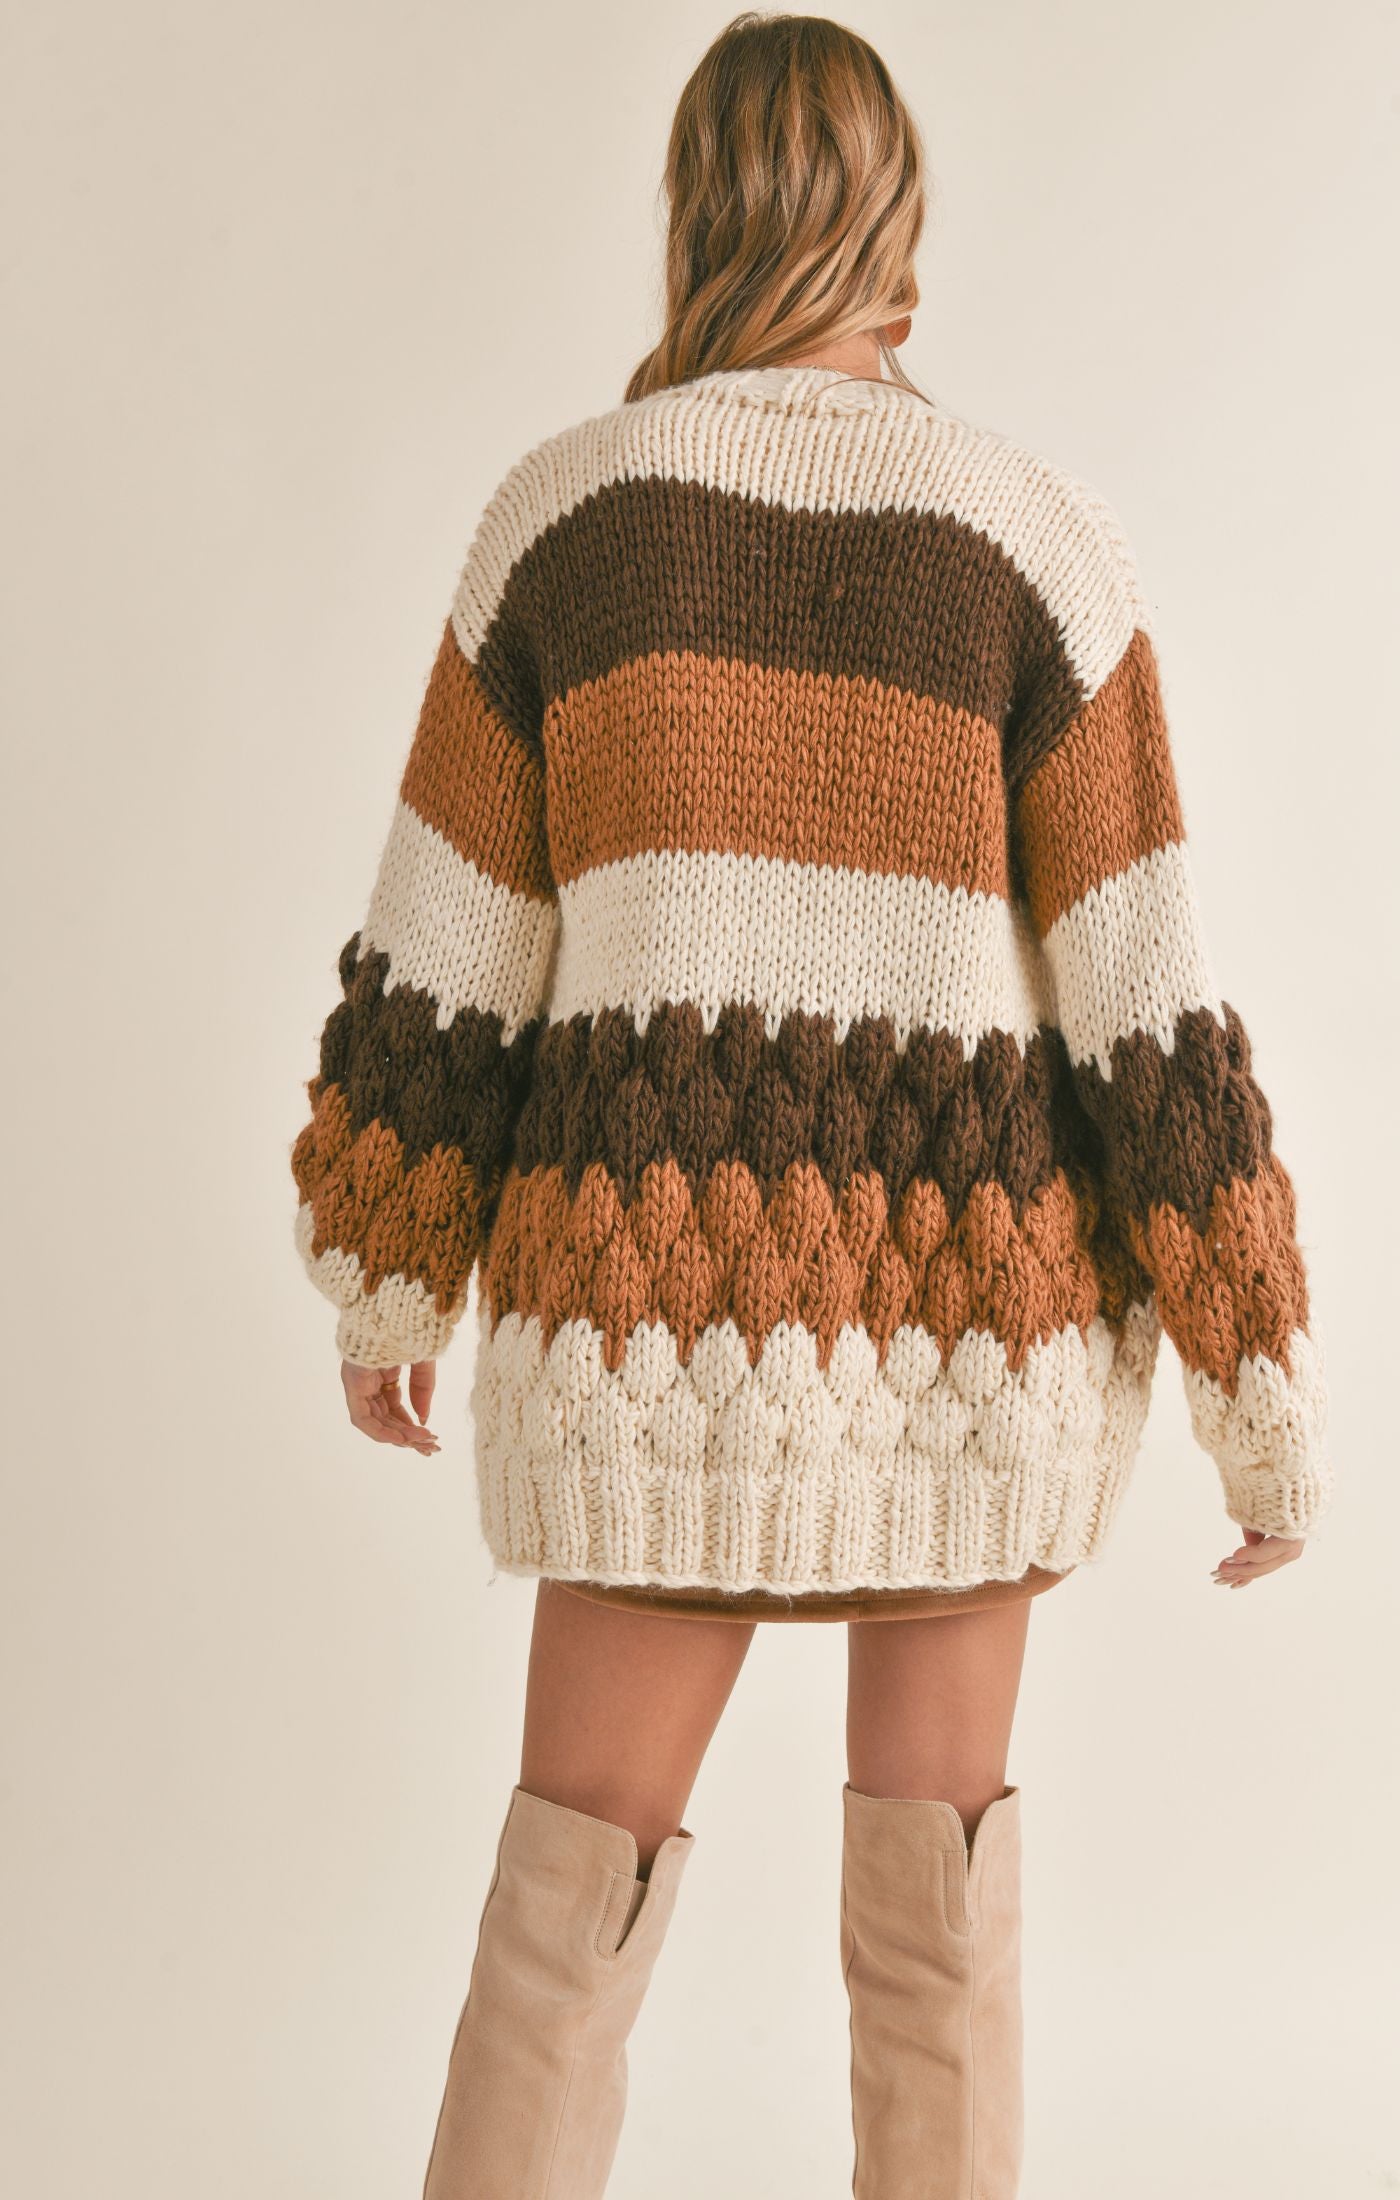 DOLLY DELIGHT CHUNKY HANDMADE CARDIGAN-brown multi,striped,chuky knit,open cardigan